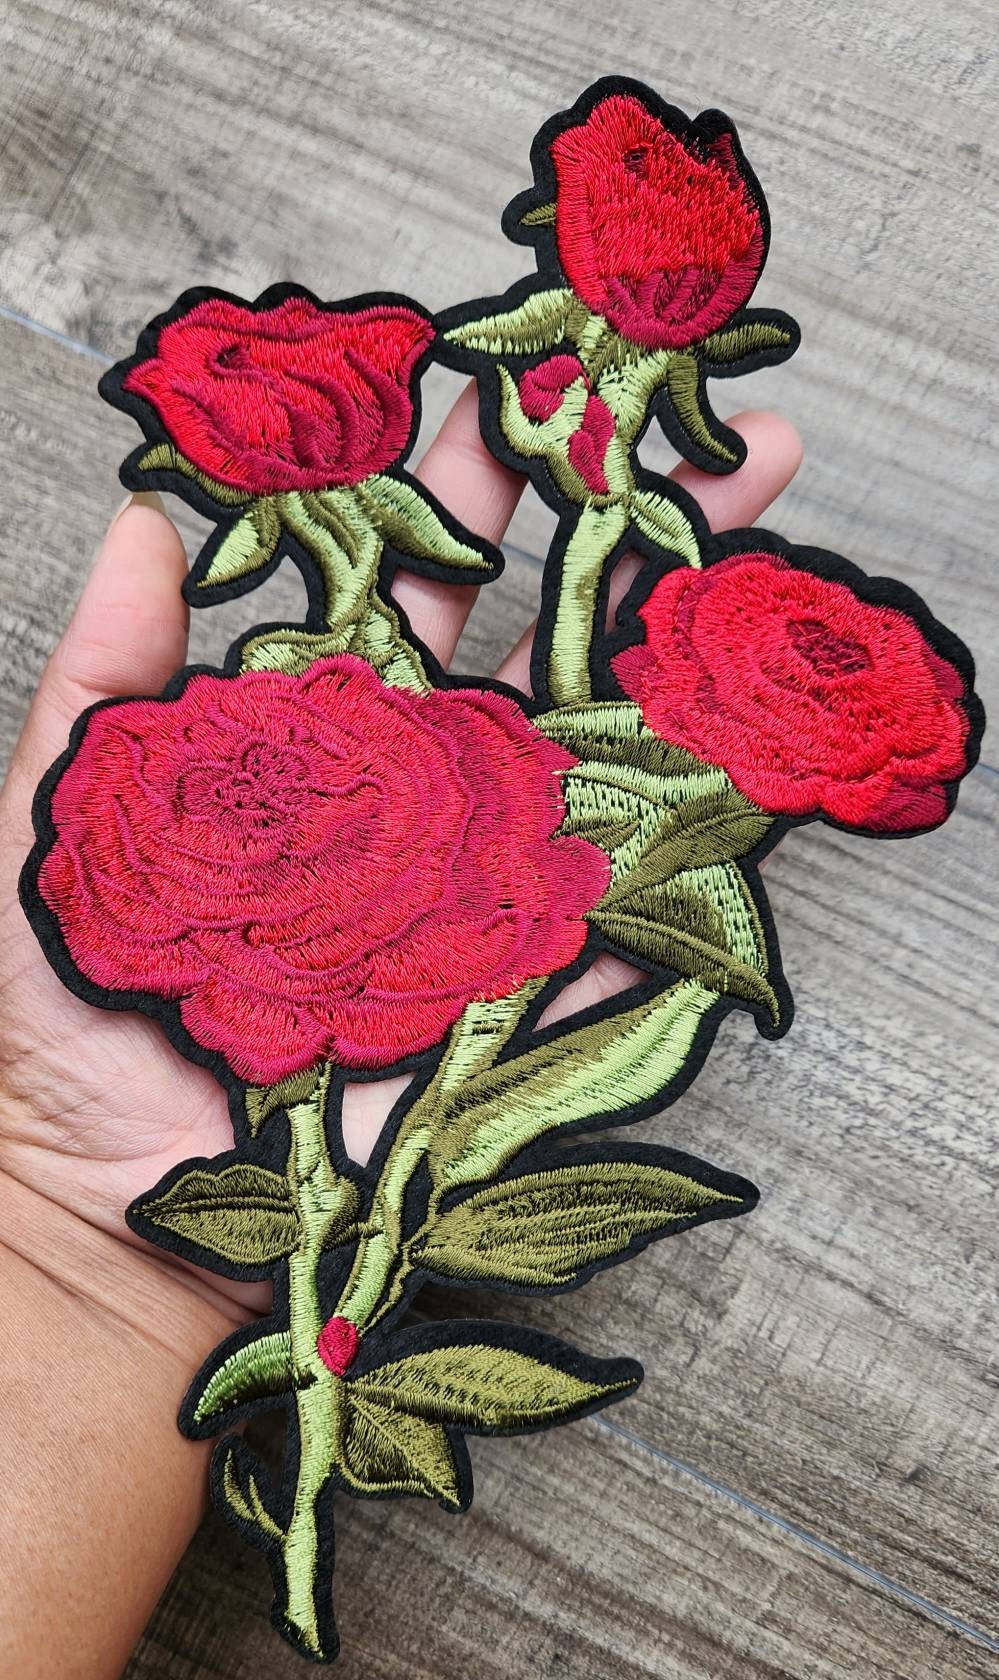 NEW 2-pc set, 10" Red Flowers w/Stem, Adorable 4 Red Flowers, Vibrant Embroidered Iron-on Floral Patches, Large Patches for Clothing